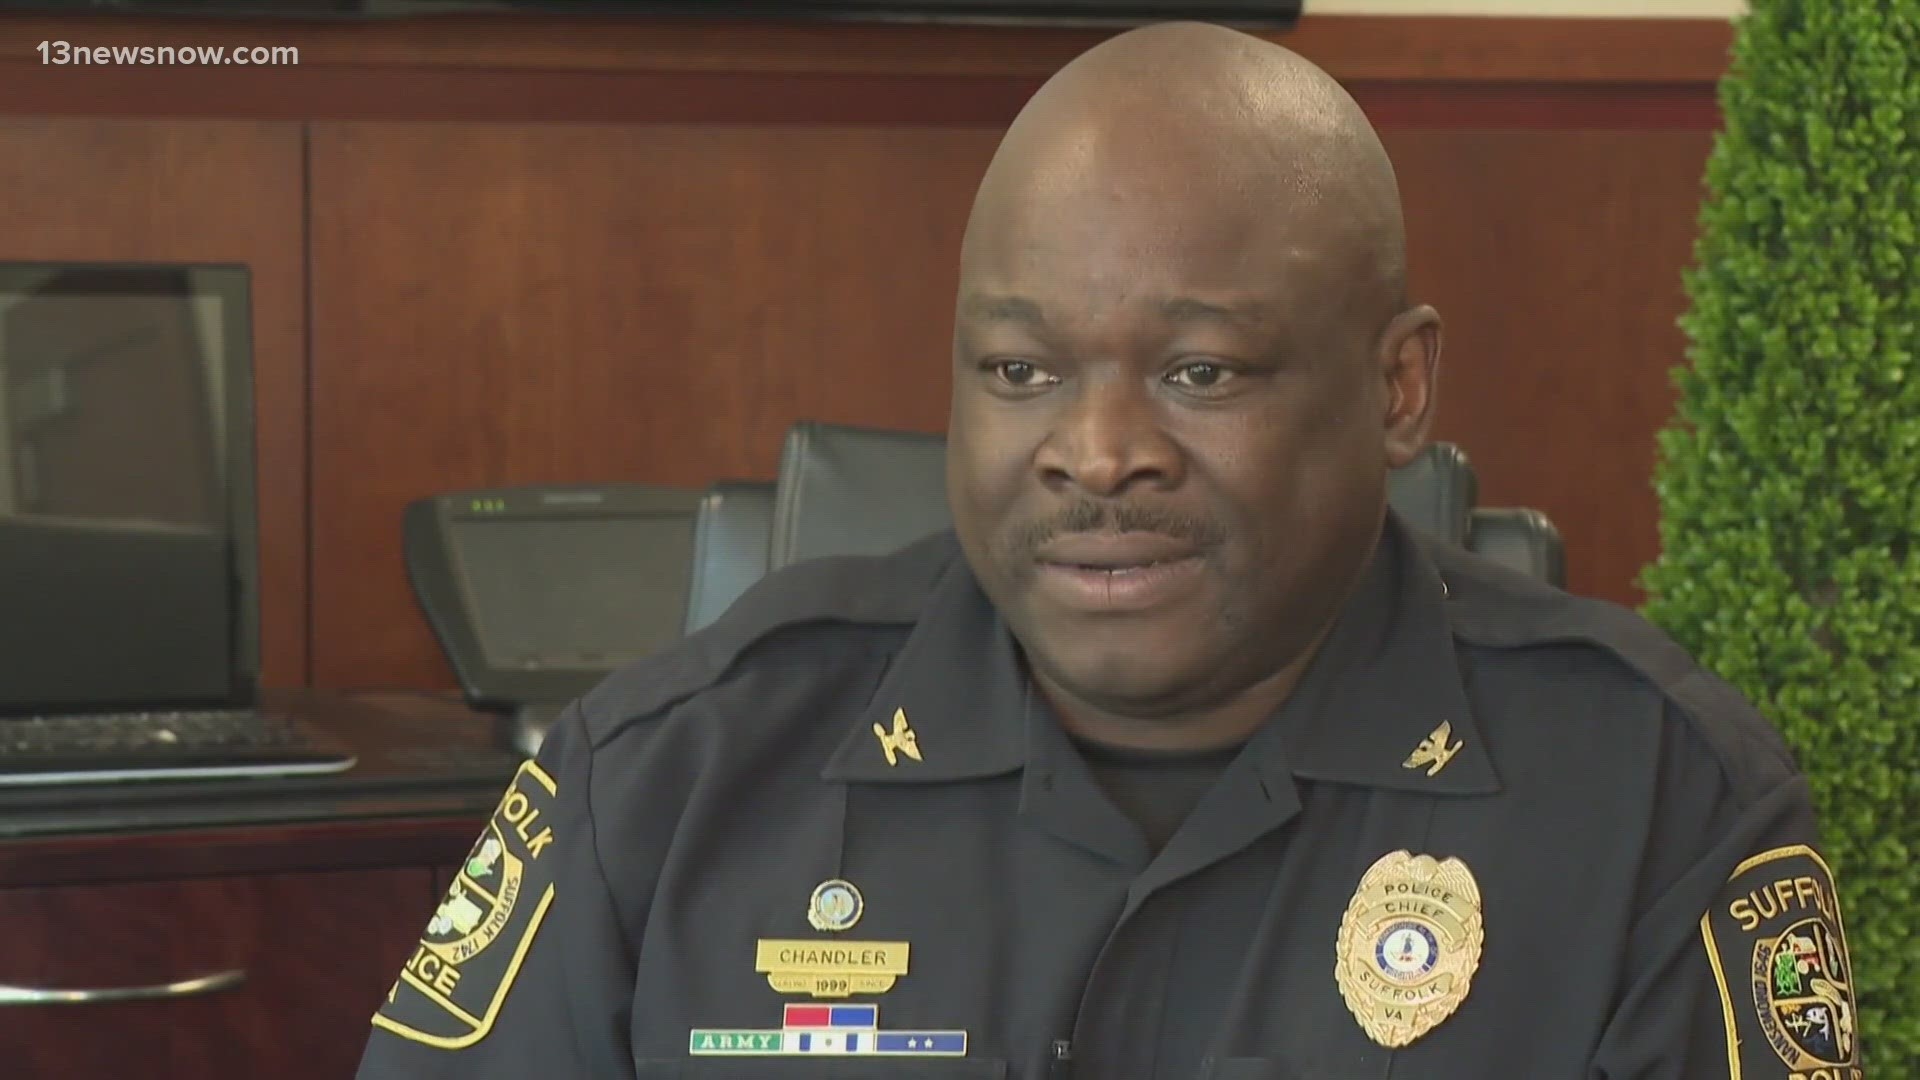 Former Police Chief Al Chandler officially retired on Monday.